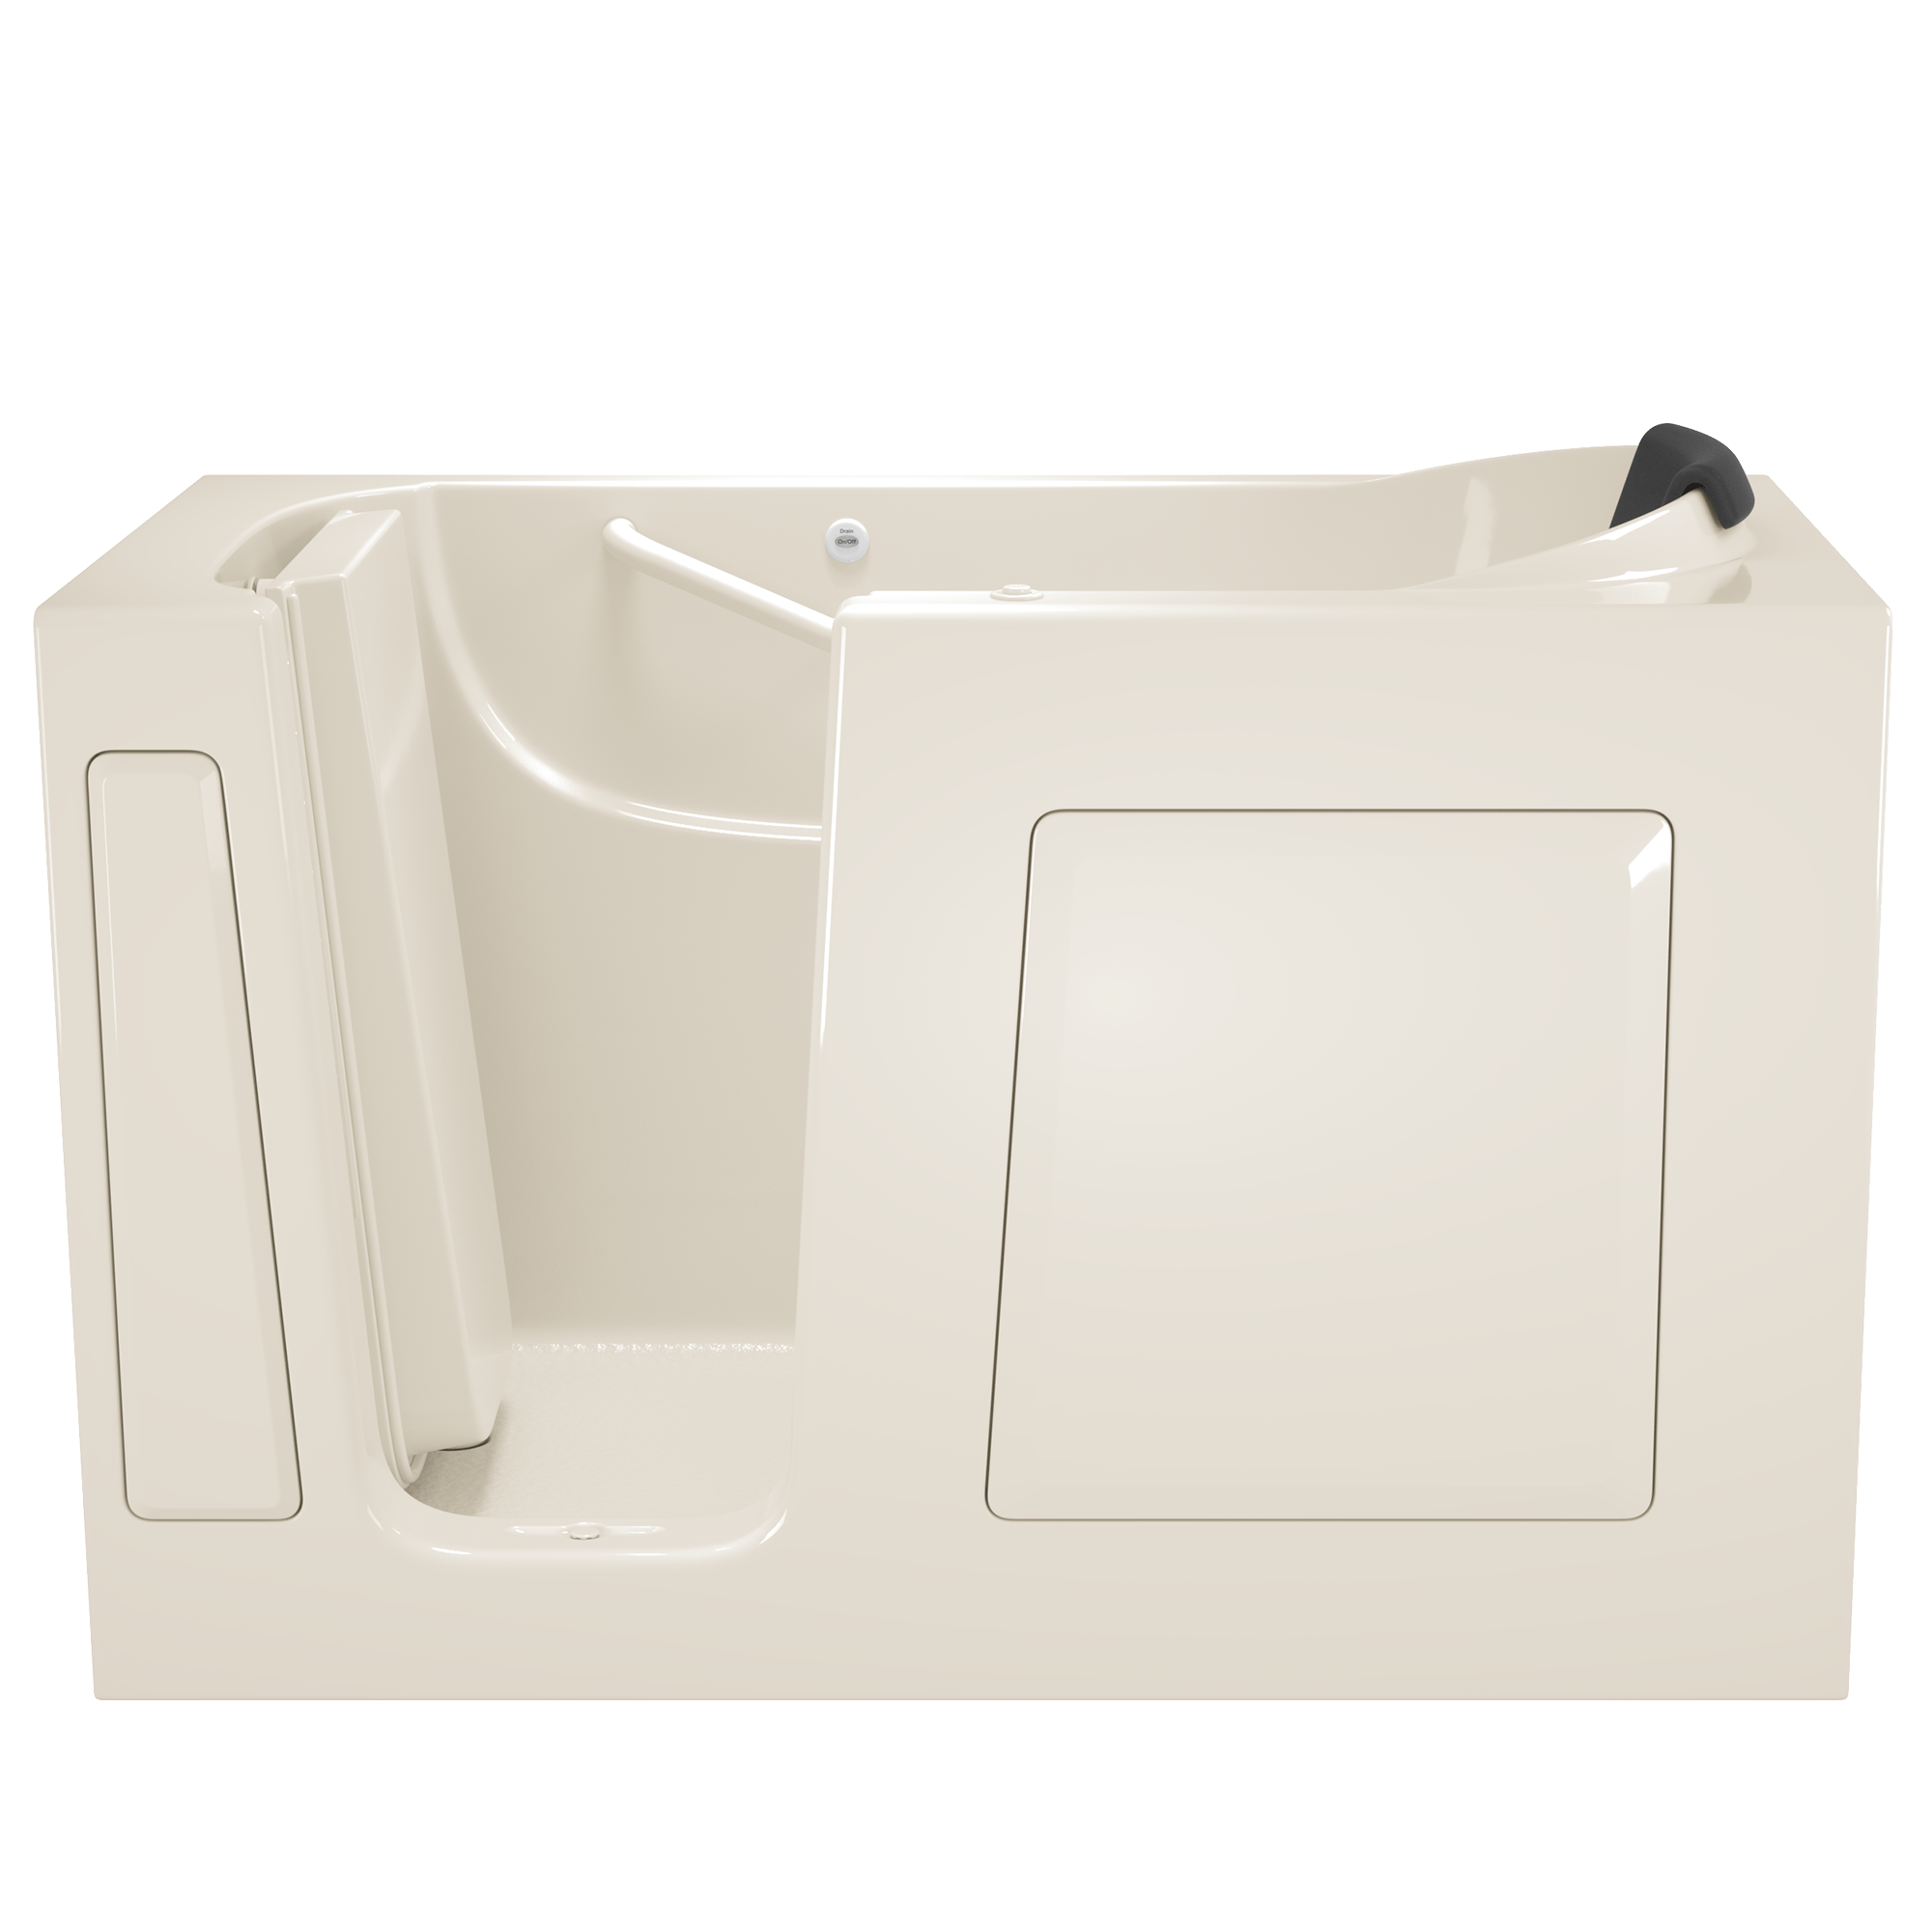 Gelcoat Premium Series 30 x 60 -Inch Walk-in Tub With Air Spa System - Left-Hand Drain